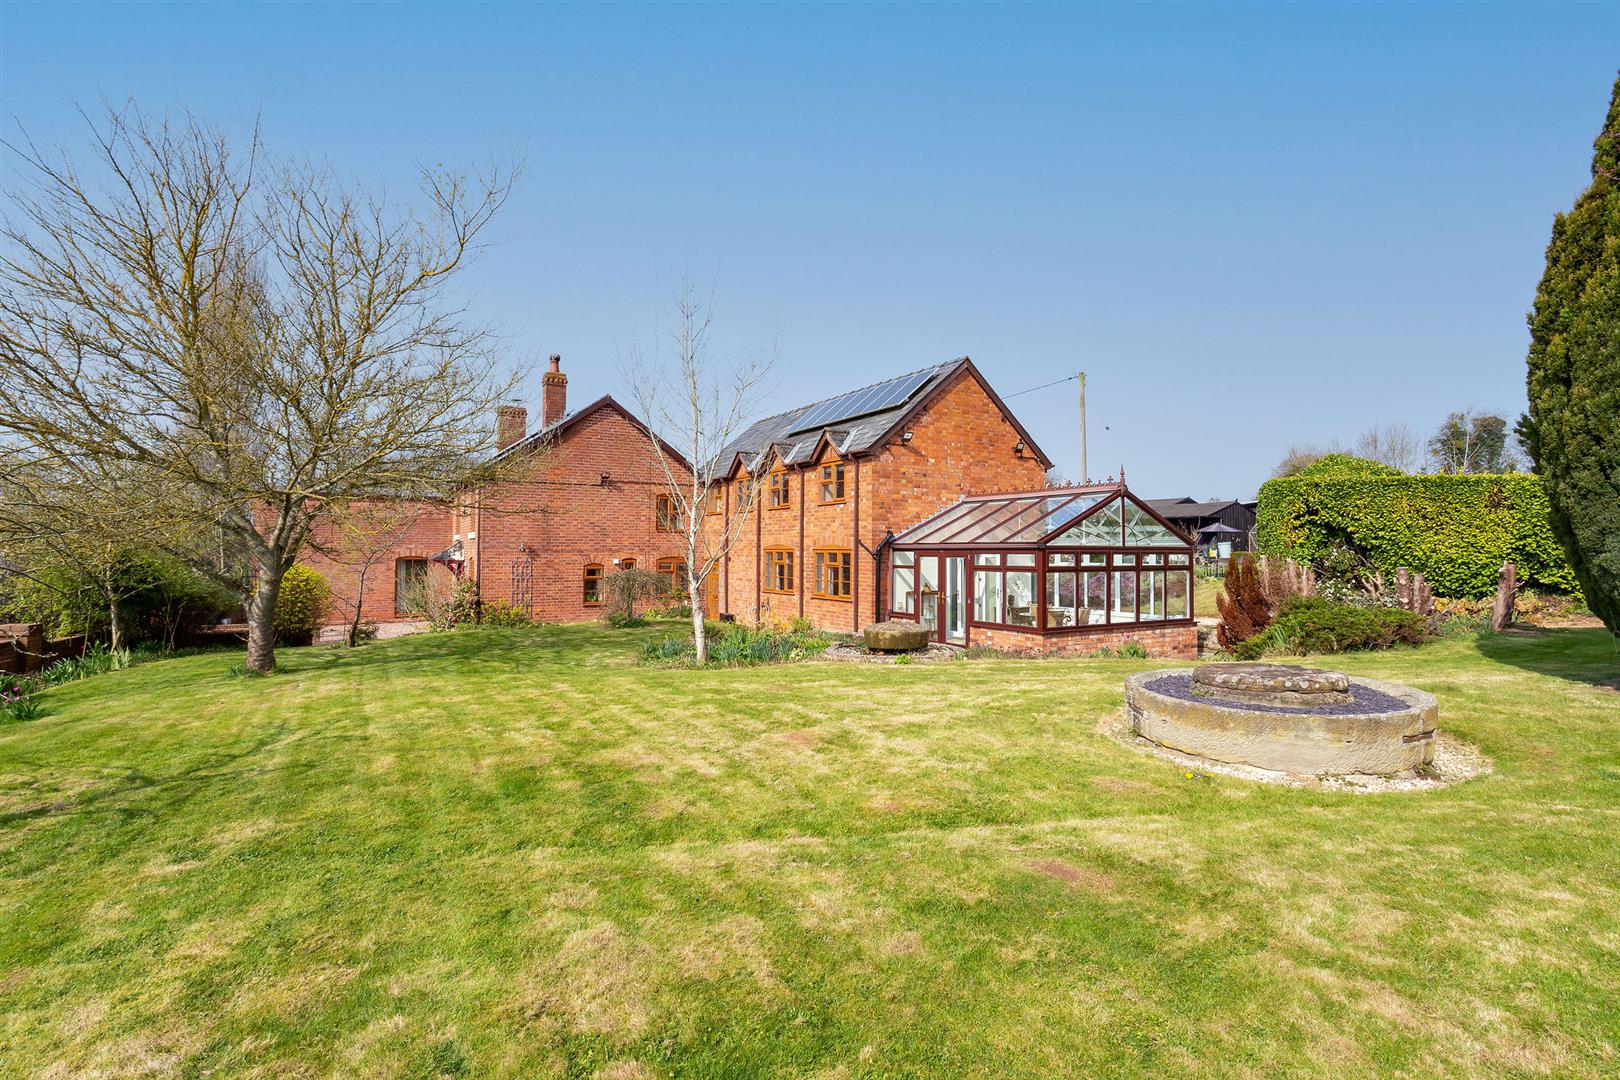 5 bed detached for sale in Marden, HR1